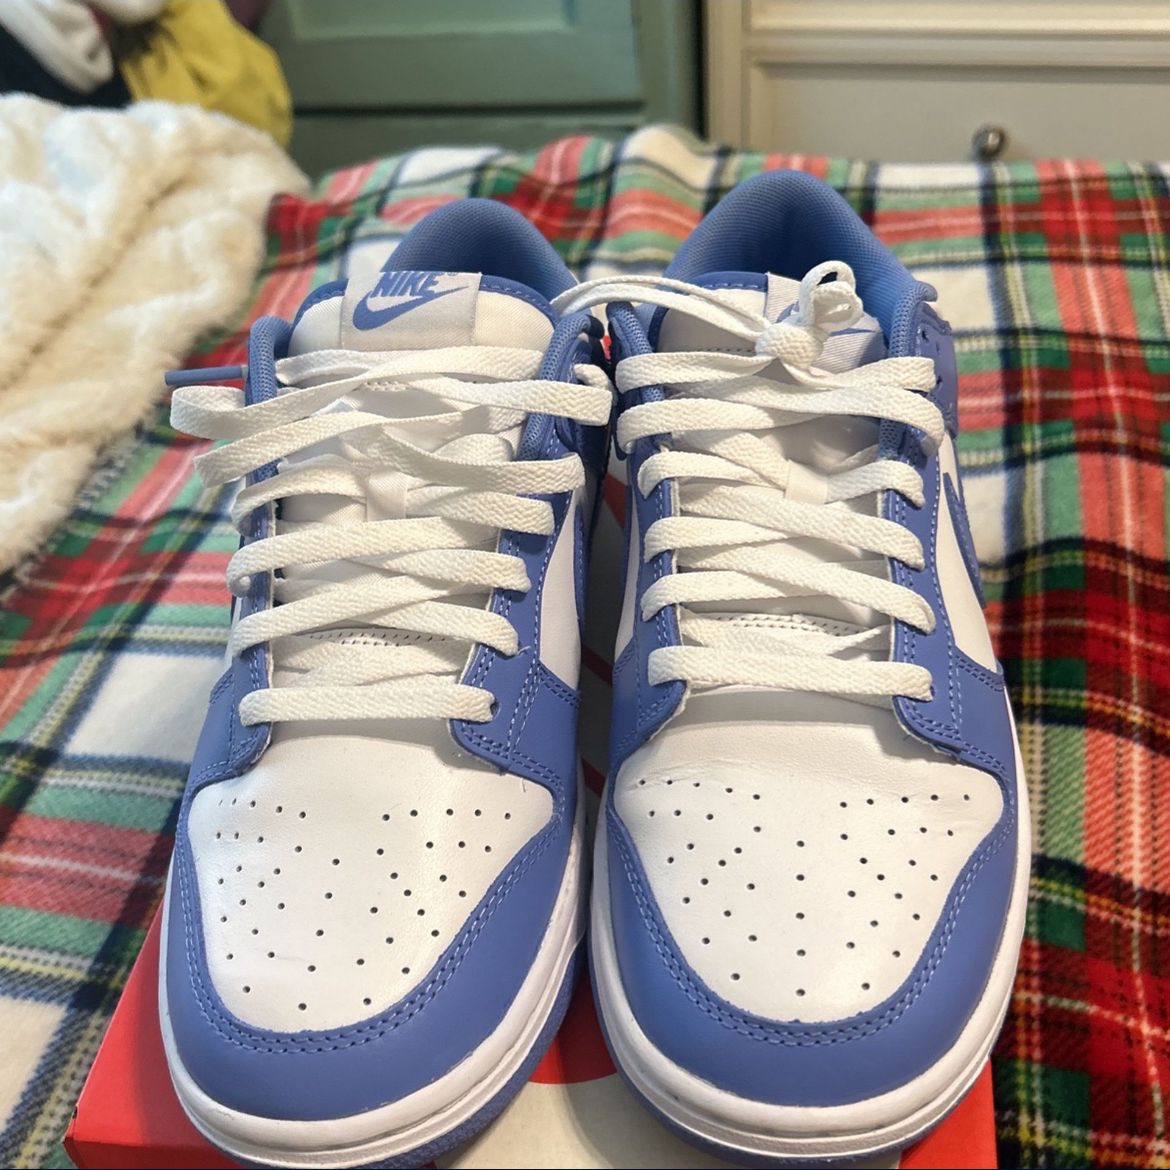 Unc Dunk Worn Once 